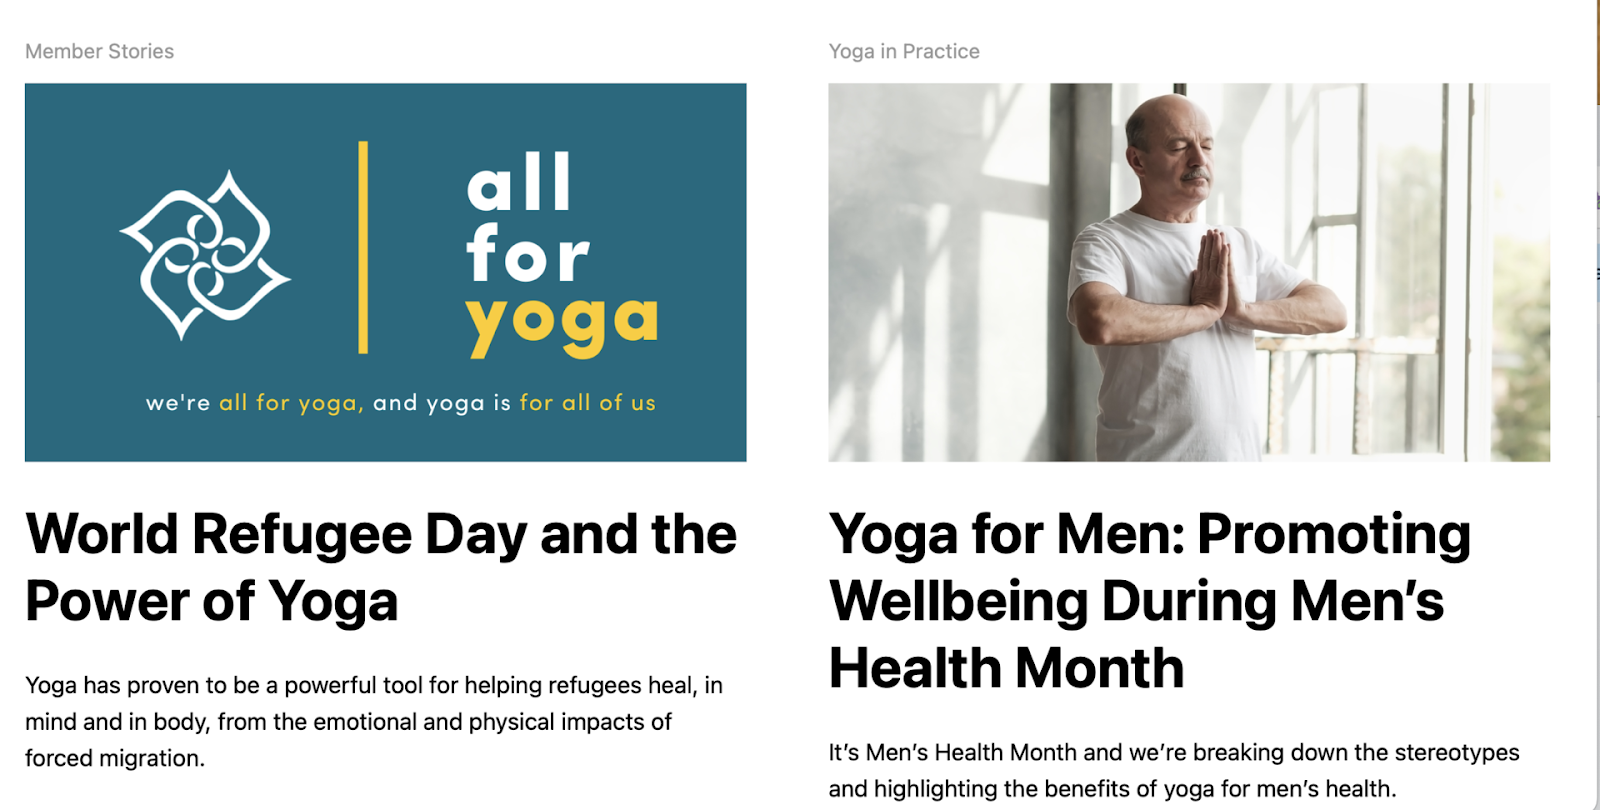 Yoga Alliance Blog main page featuring two recent posts